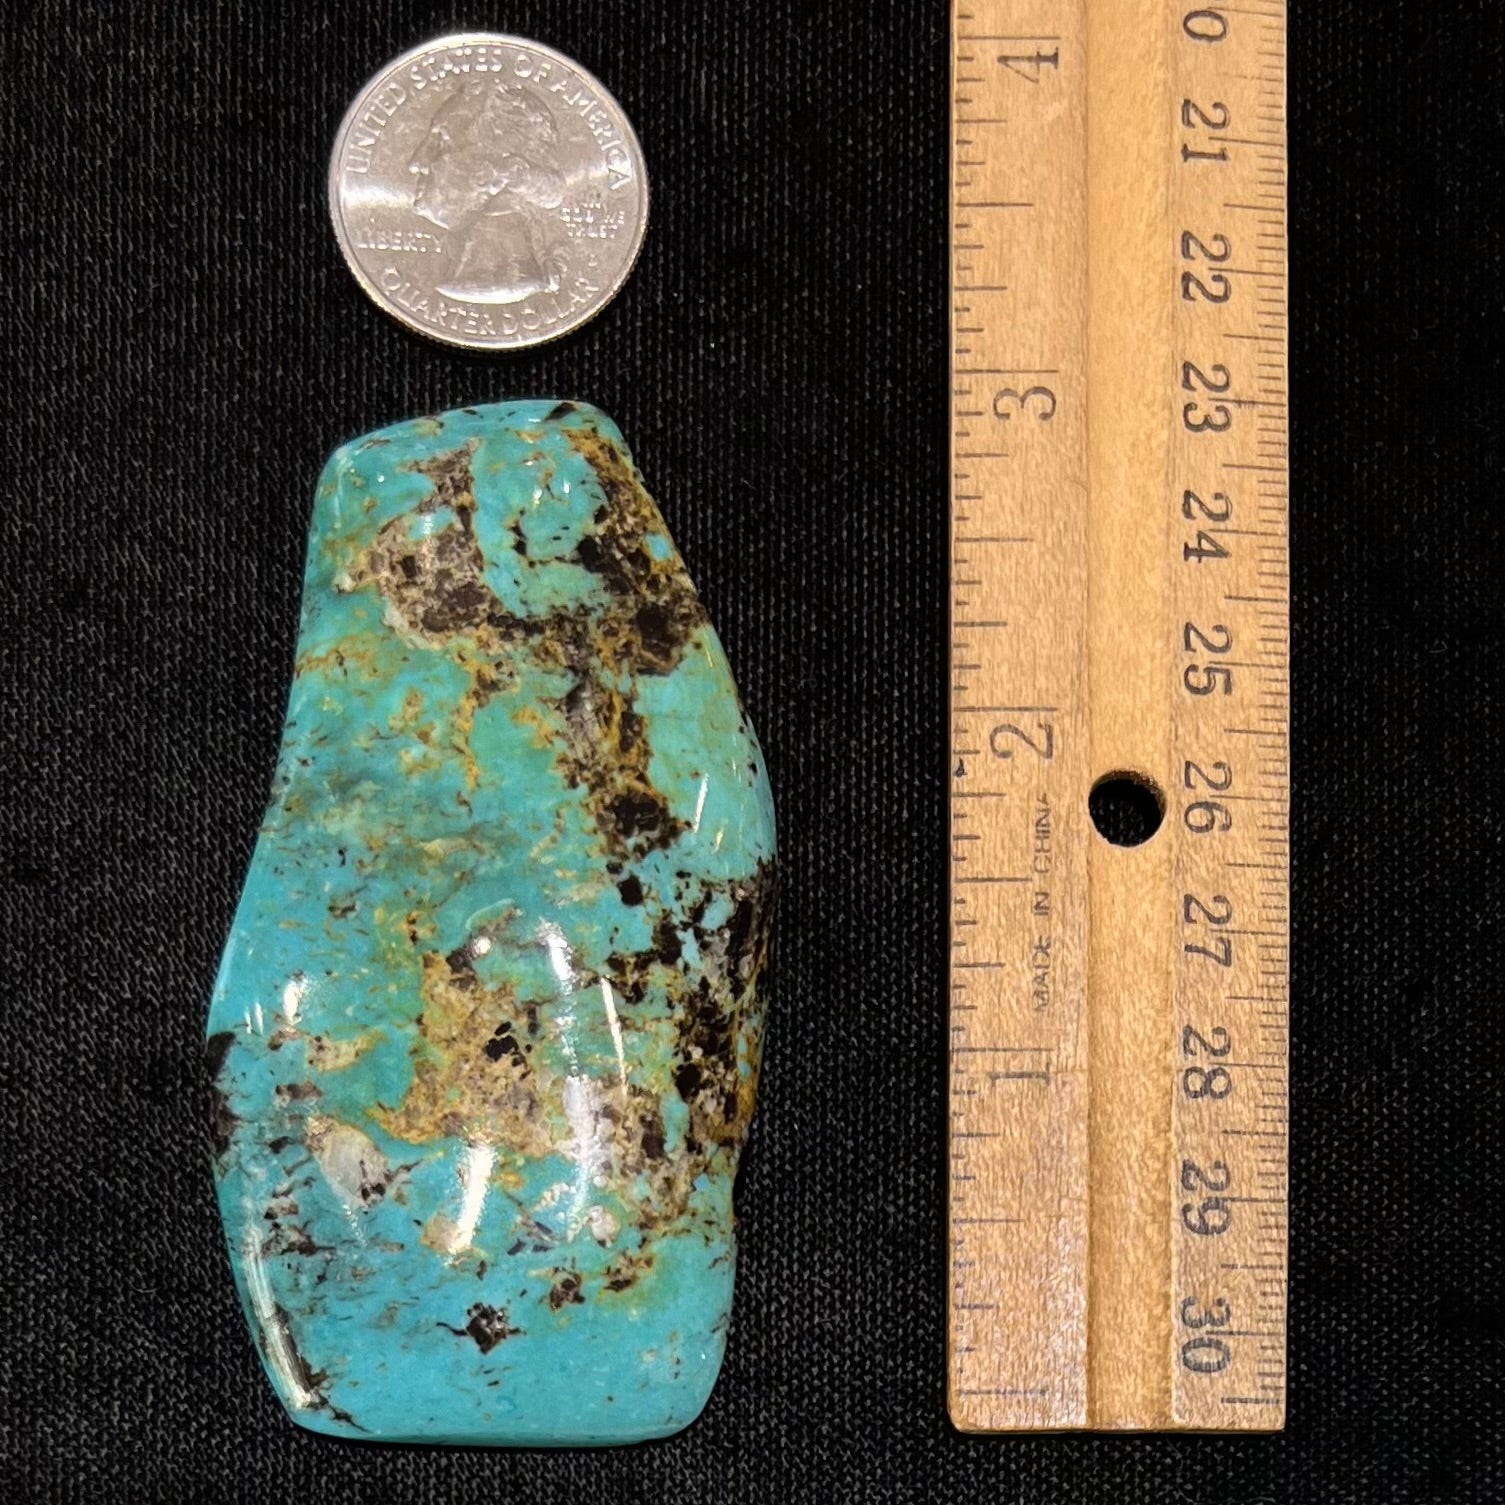 Loose turquoise stone from Cow Springs, Nevada.  Black and white matrix is visible.